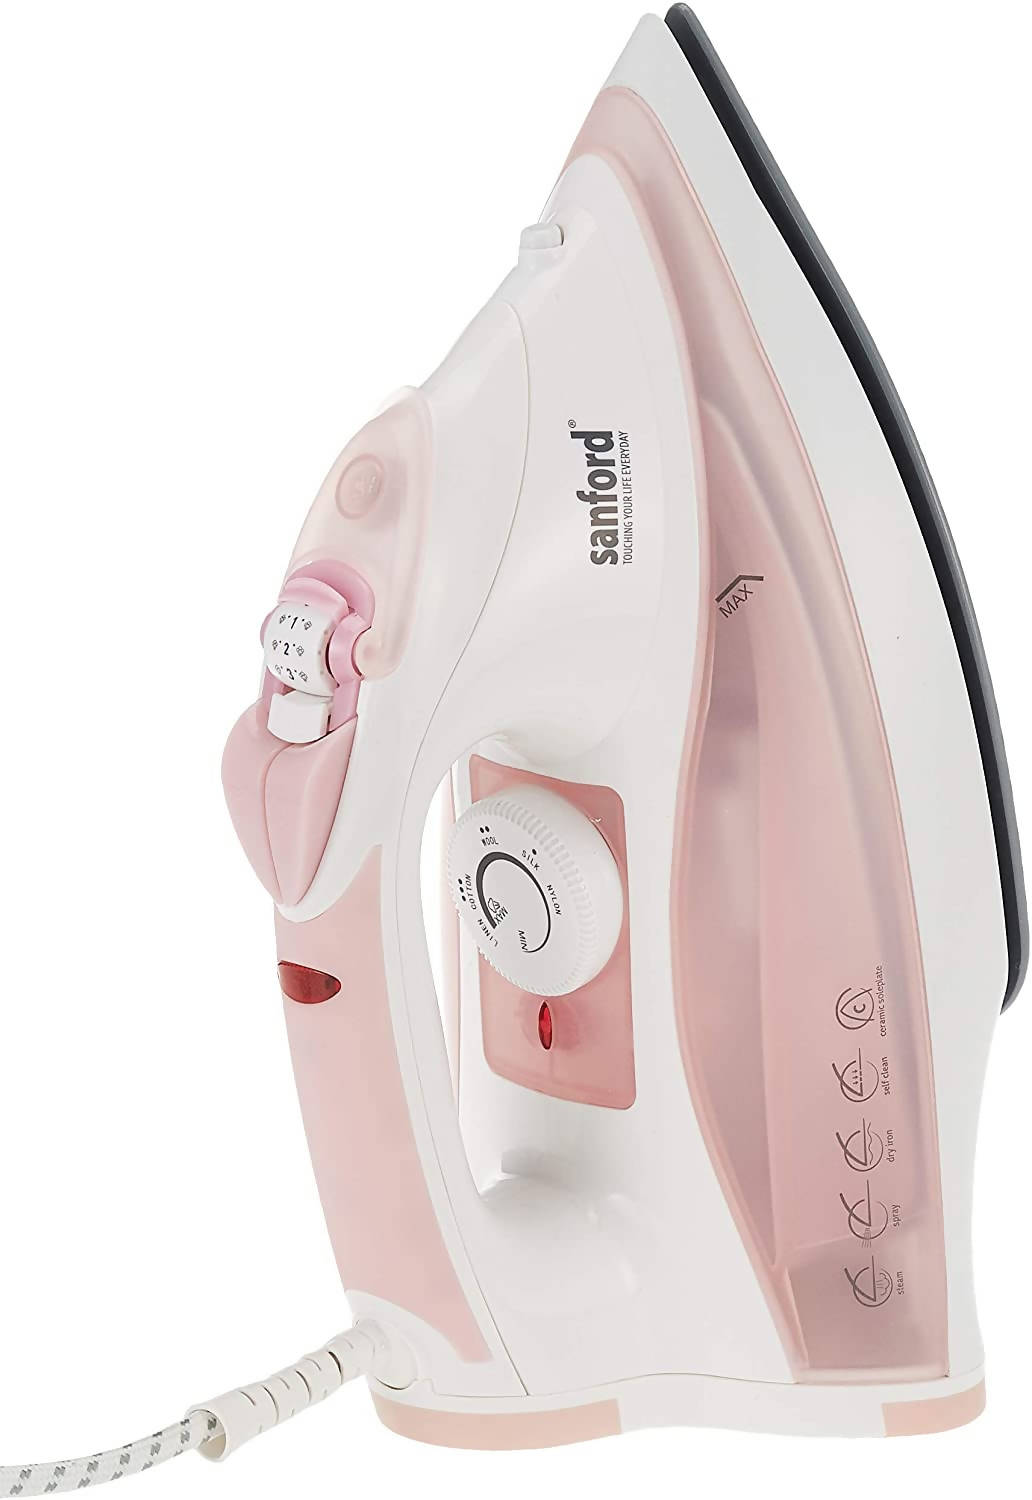 Sanford Ceramic Steam Iron Pink | reliable performance | lightweight | variable steam settings | safety features | stylish | even heat distribution | Halabh.com